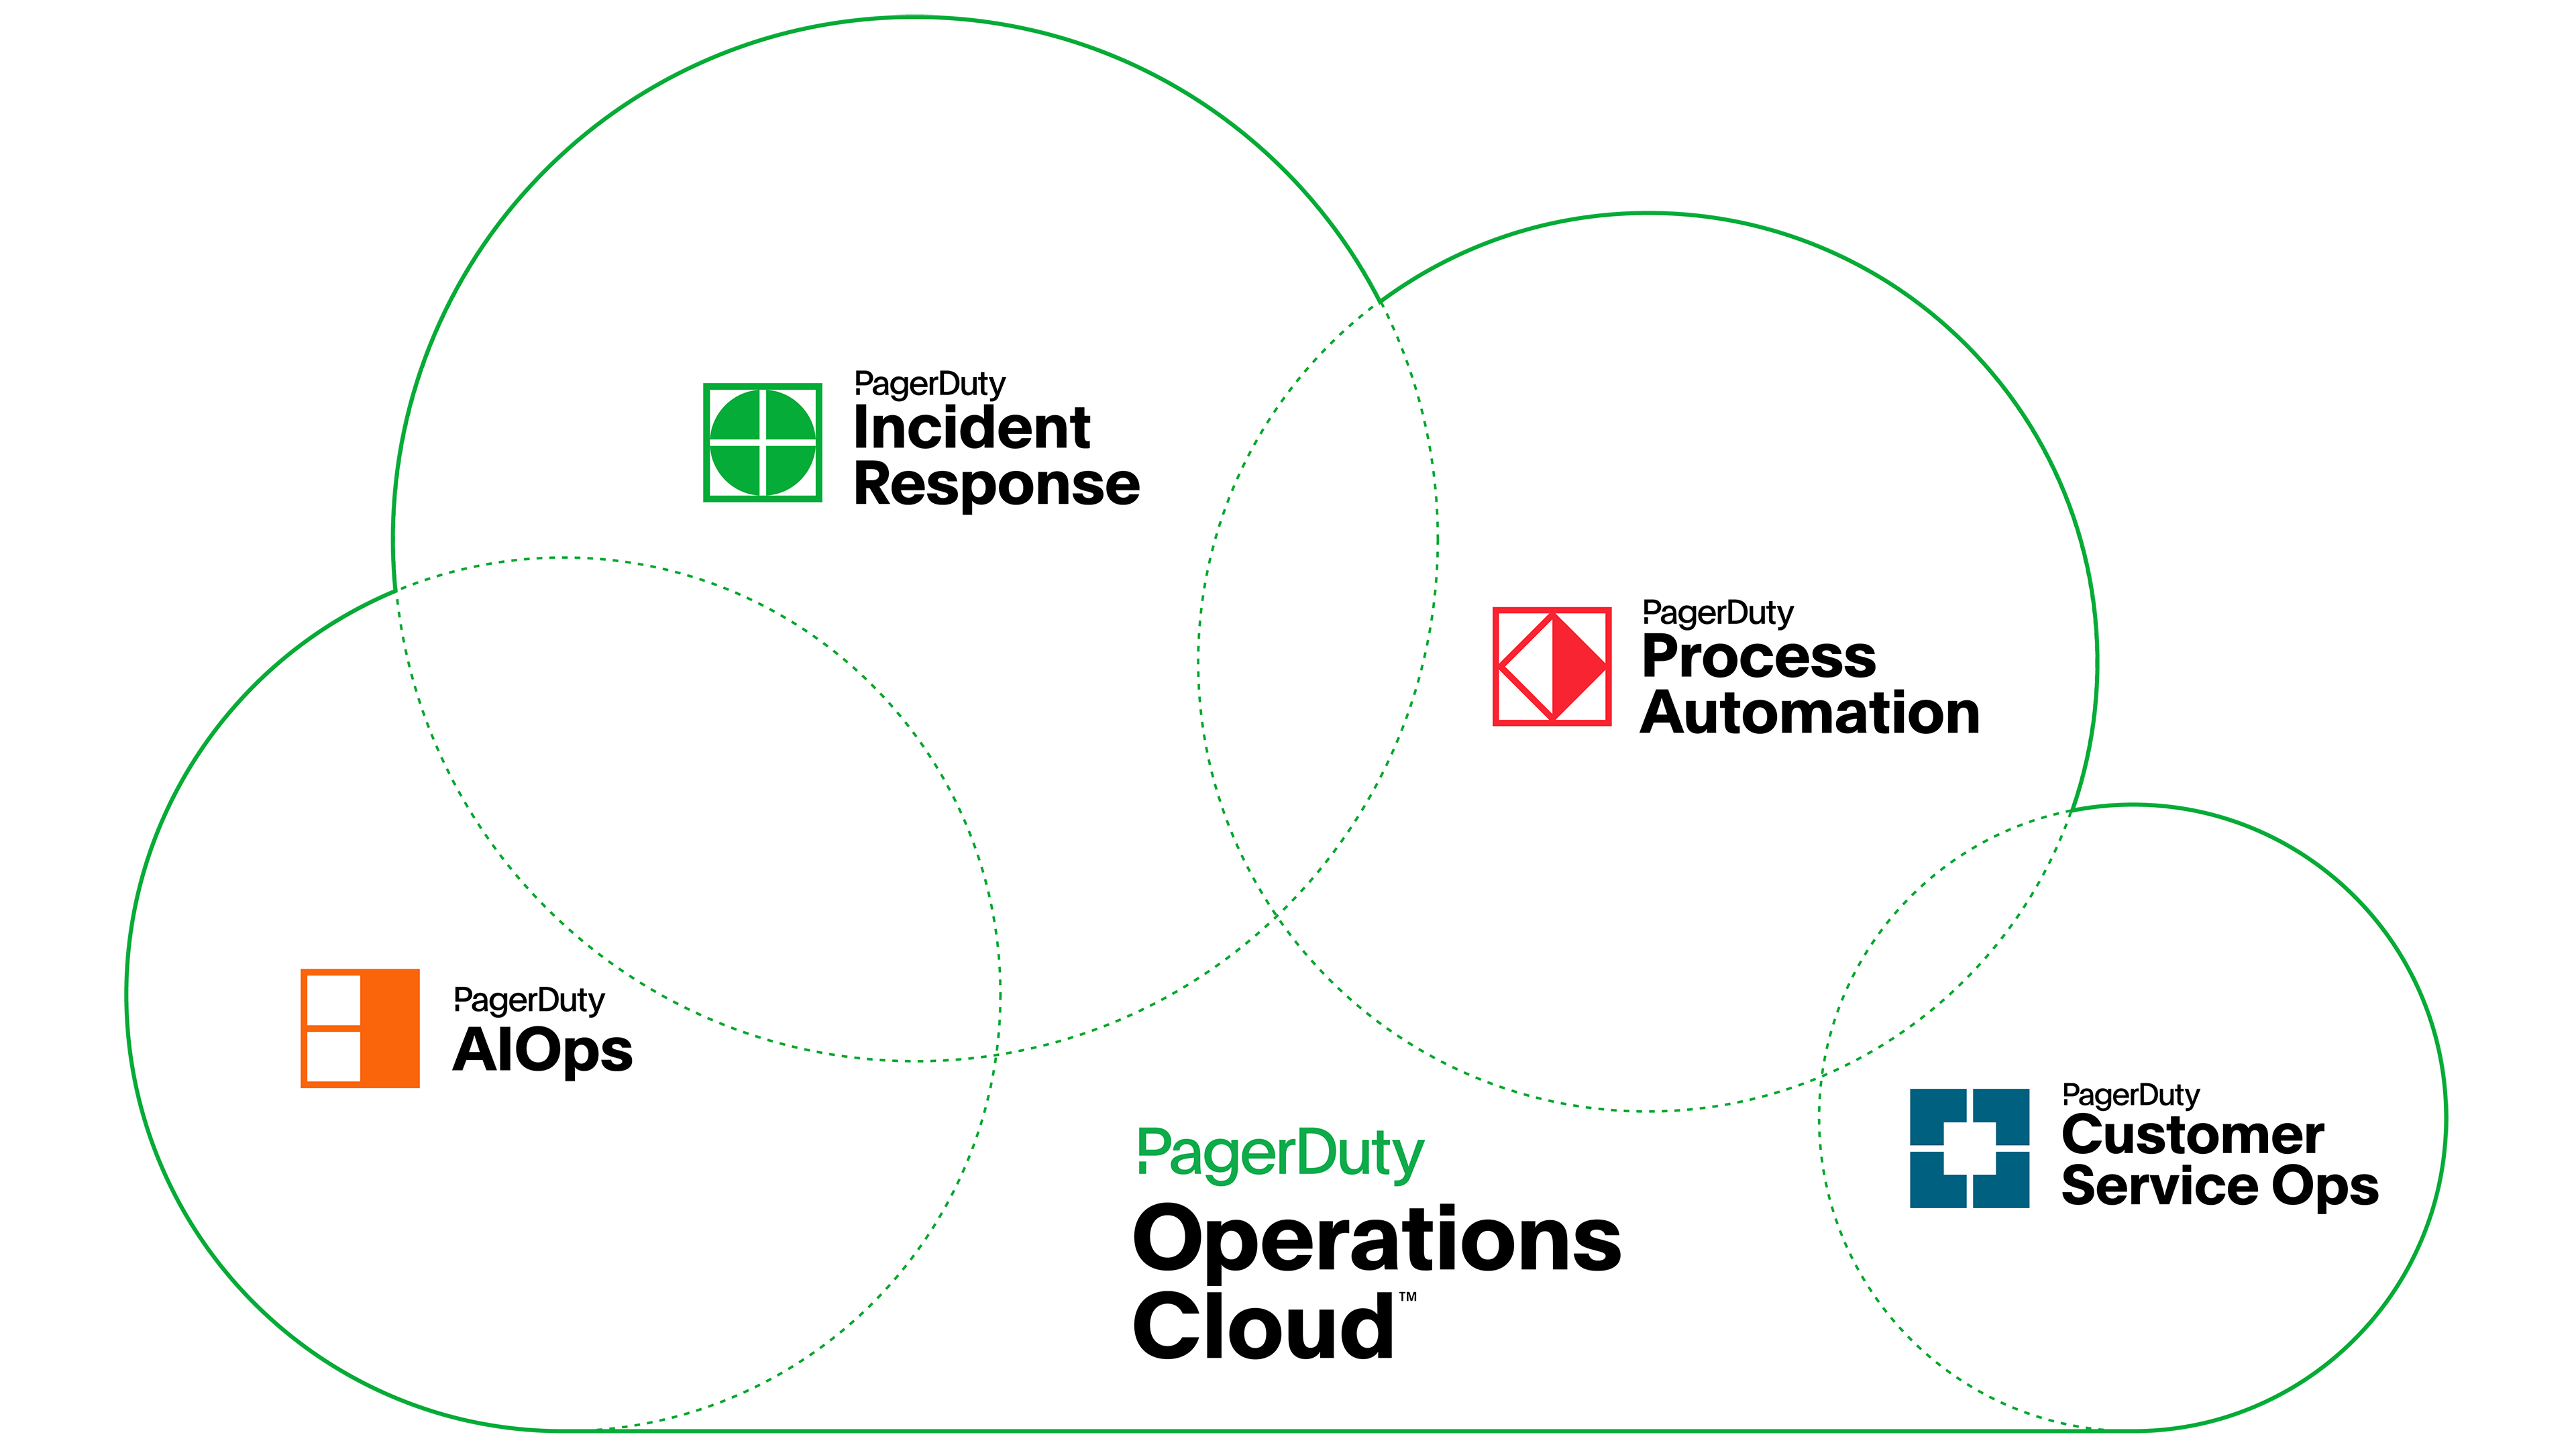 The PagerDuty Operations Cloud